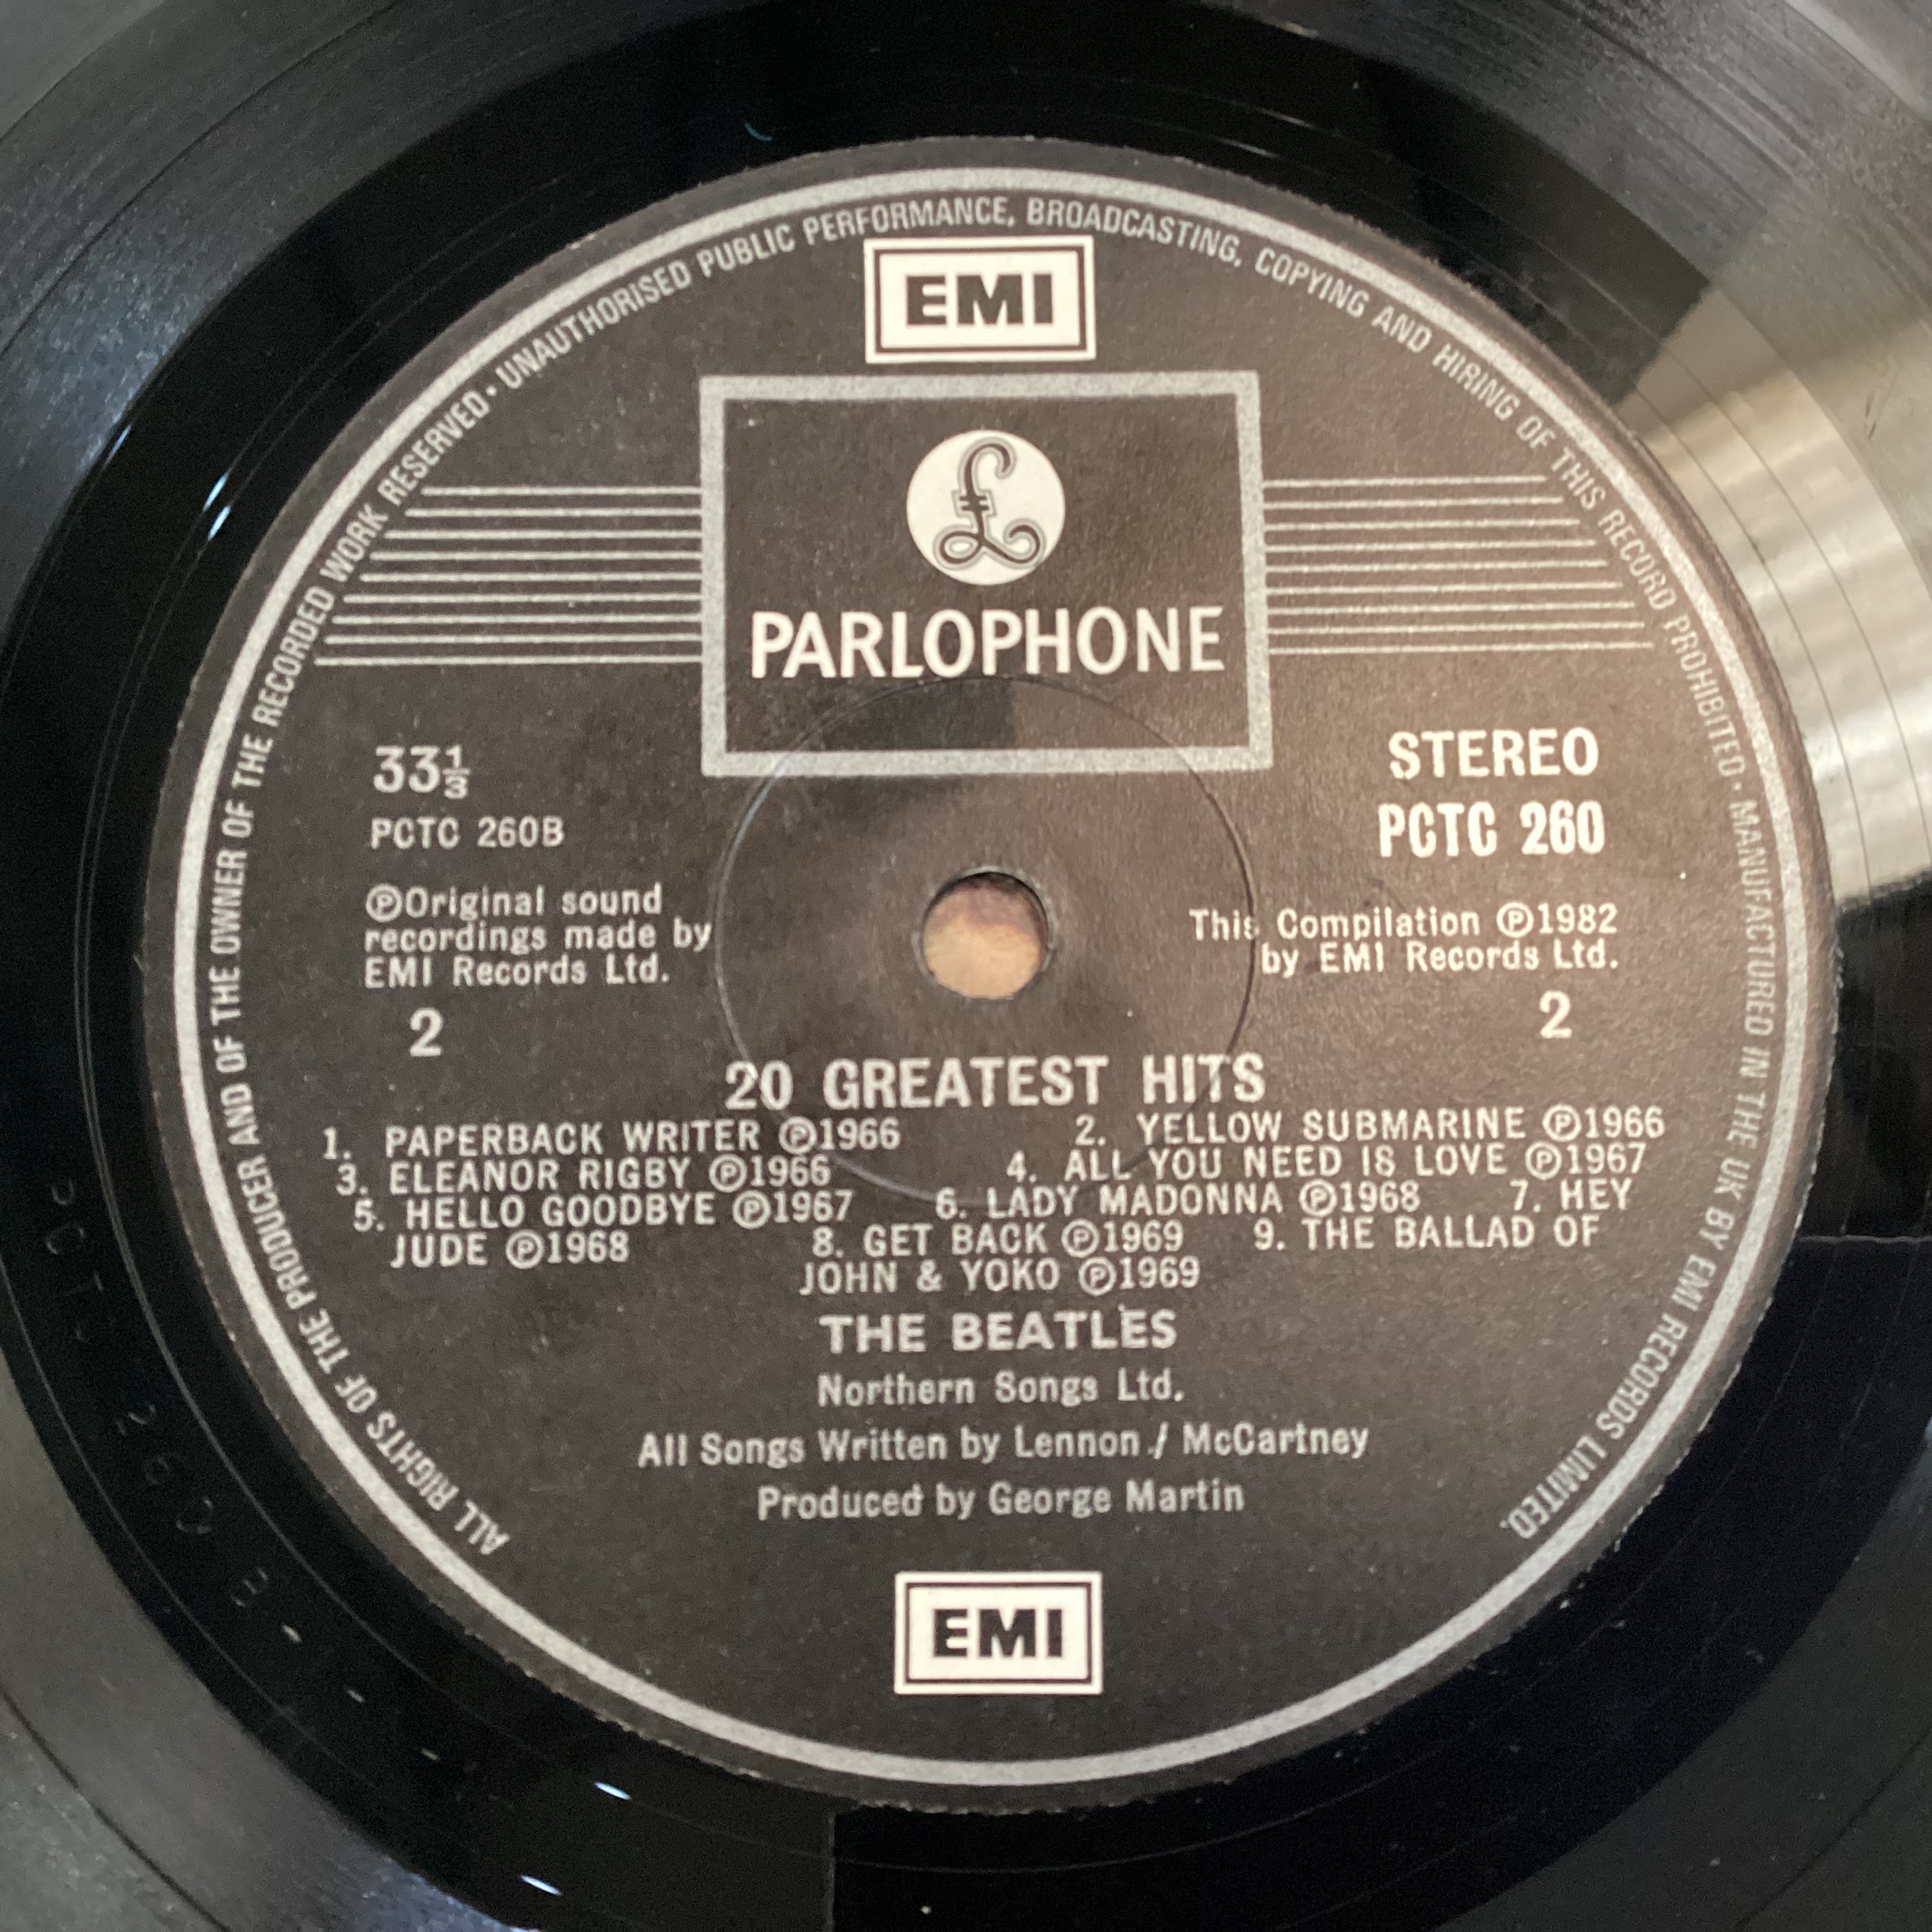 THE BEATLES VINYL LP RECORDS X 2. First we have a copy of ‘Help!’ On Parlophone PMC 1255 released in - Bild 4 aus 9